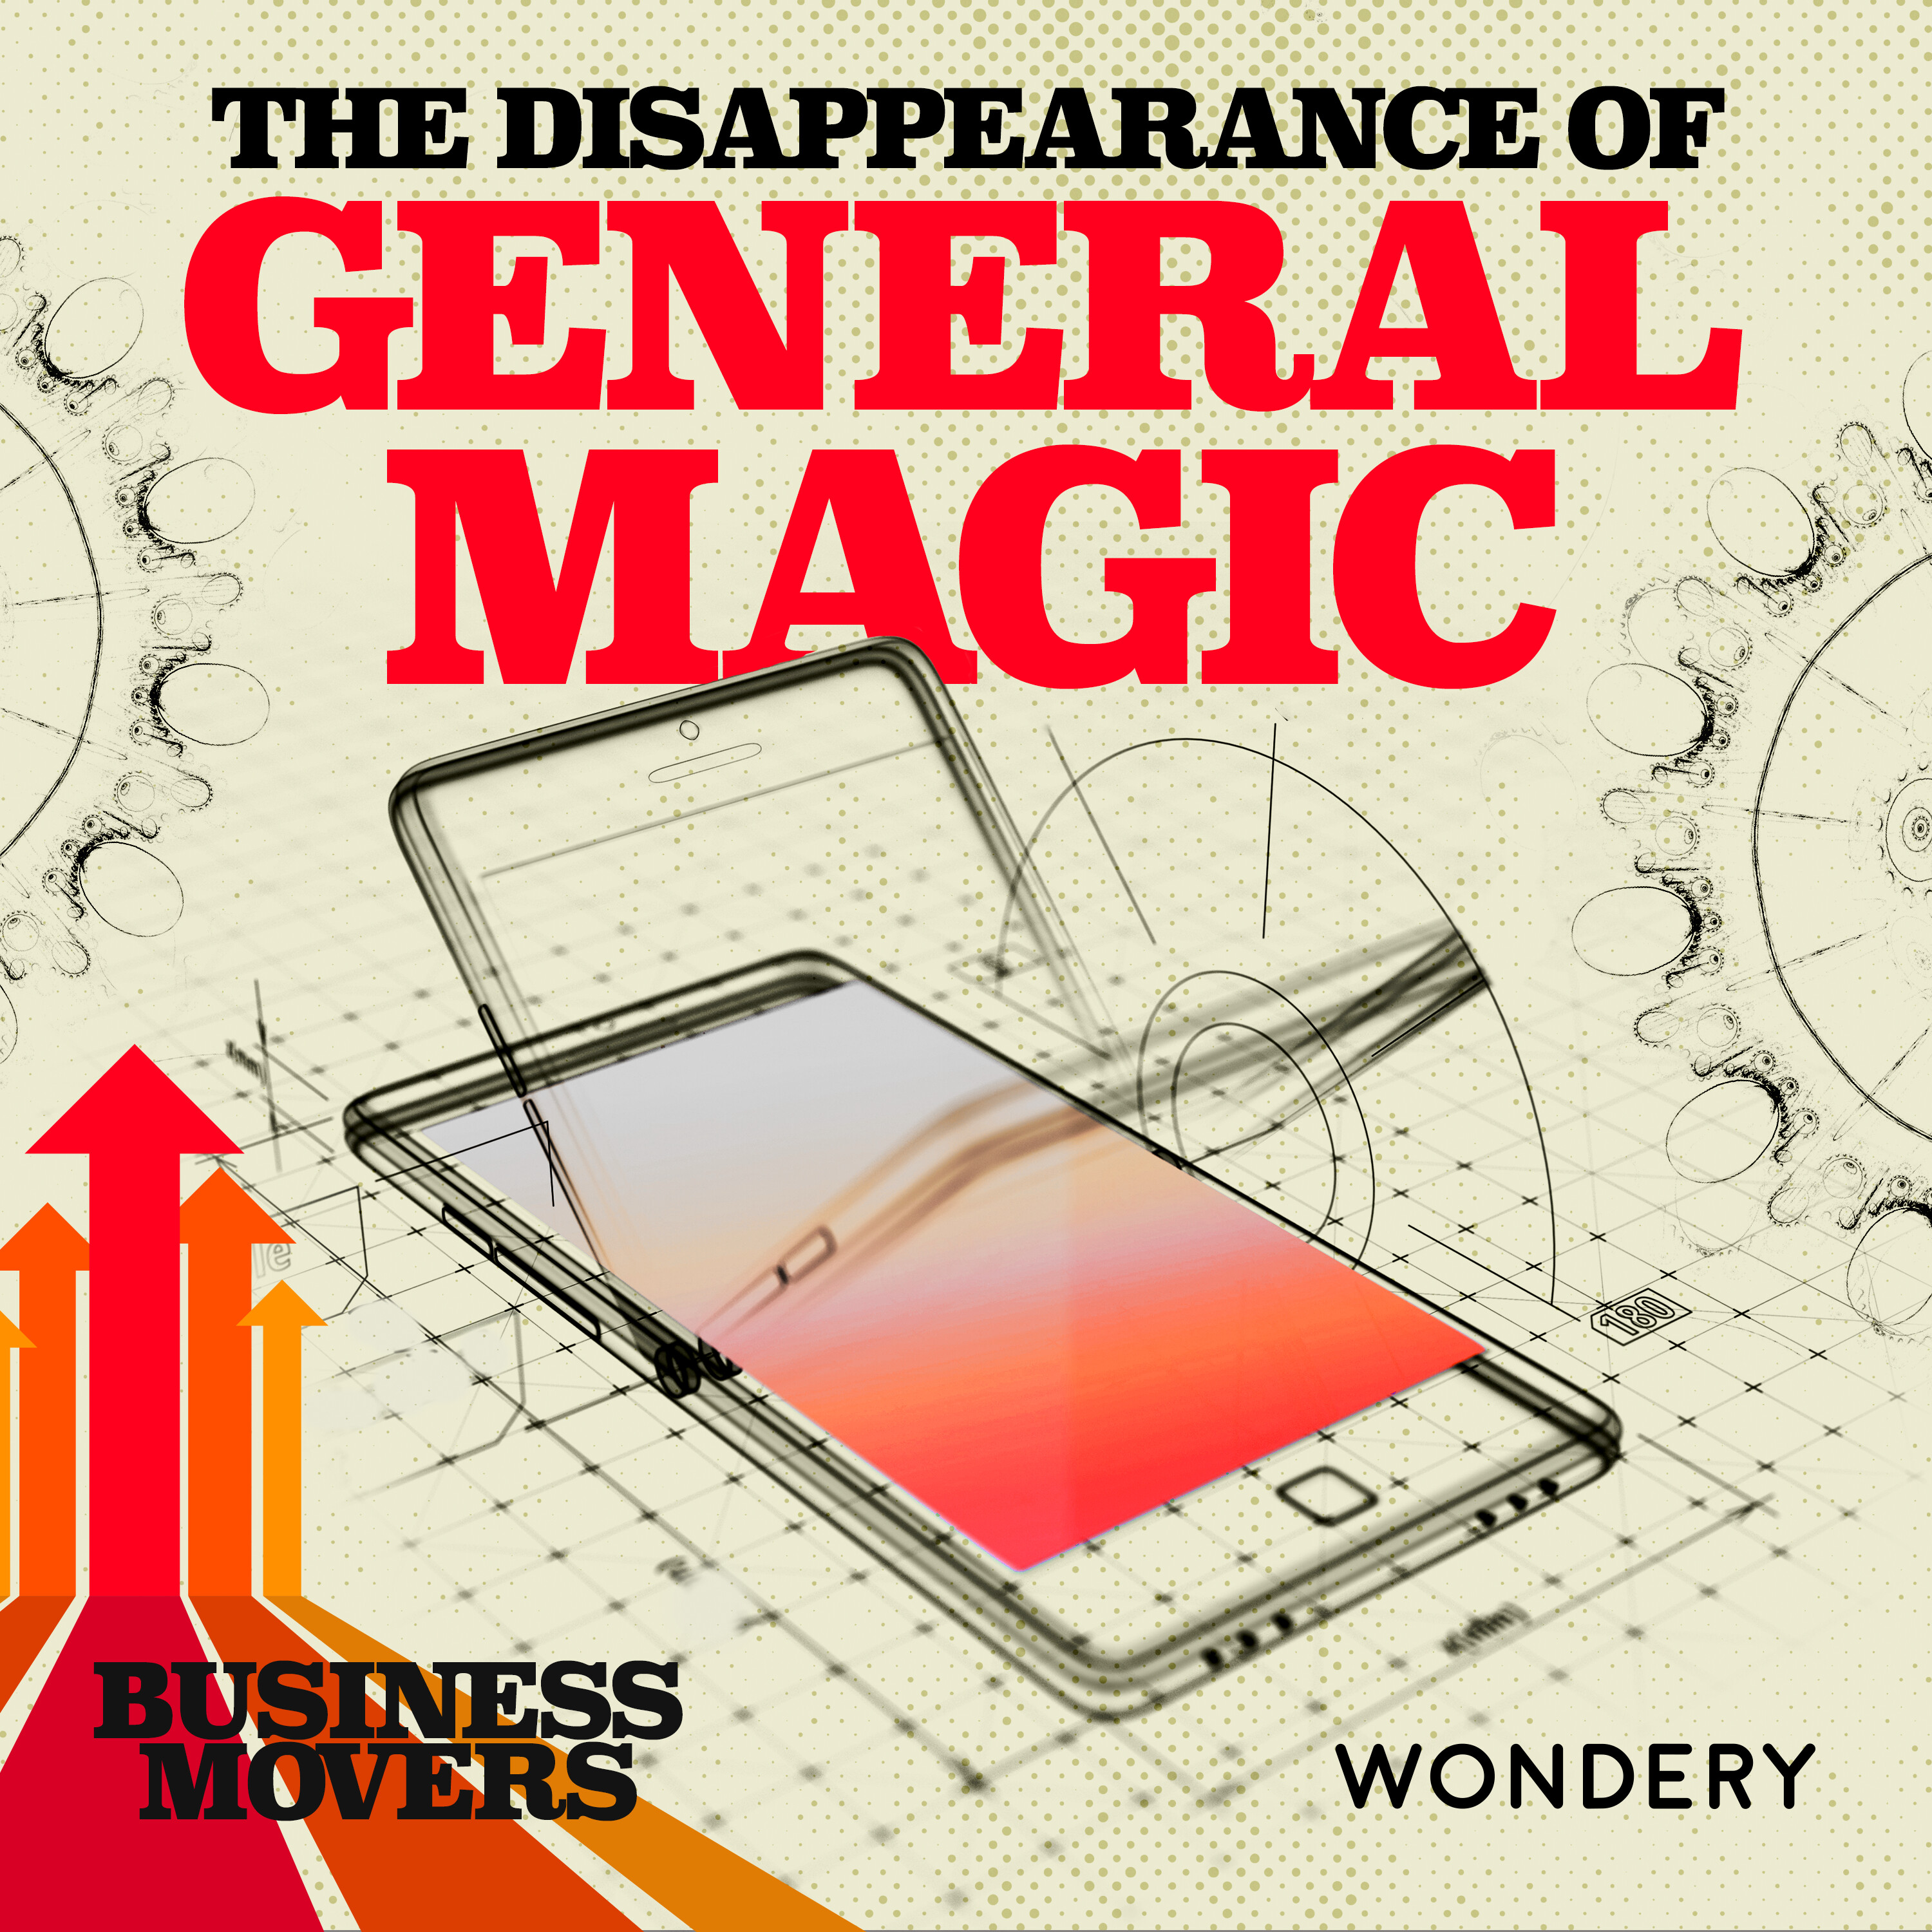 The Disappearance of General Magic | The Early Bird Gets No Worm | 4